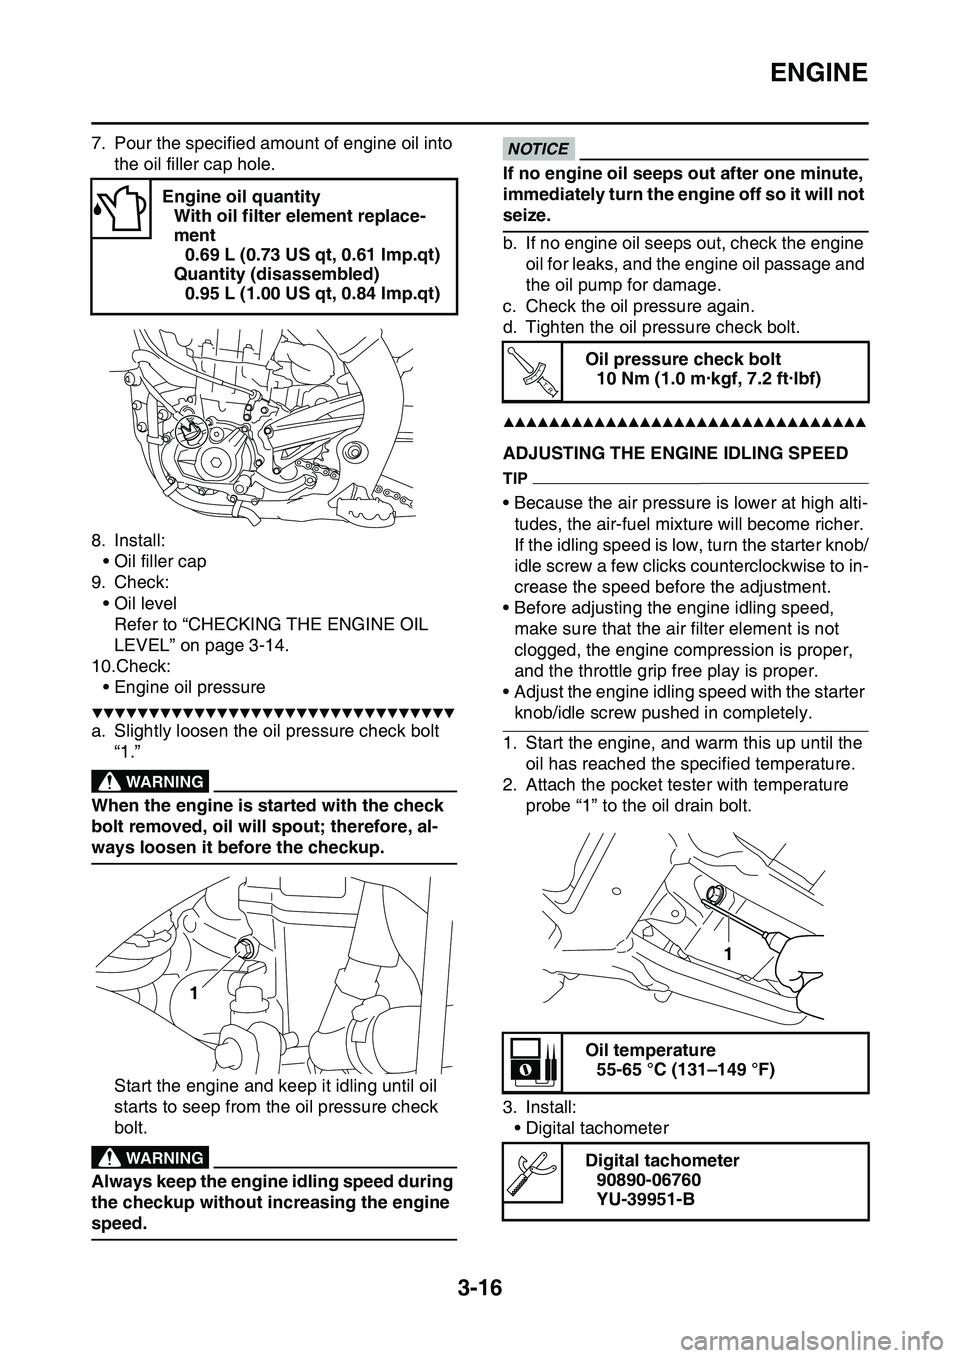 YAMAHA YZ450F 2014  Owners Manual ENGINE
3-16
7. Pour the specified amount of engine oil into 
the oil filler cap hole.
8. Install:
• Oil filler cap
9. Check:
• Oil level
Refer to “CHECKING THE ENGINE OIL 
LEVEL” on page 3-14.